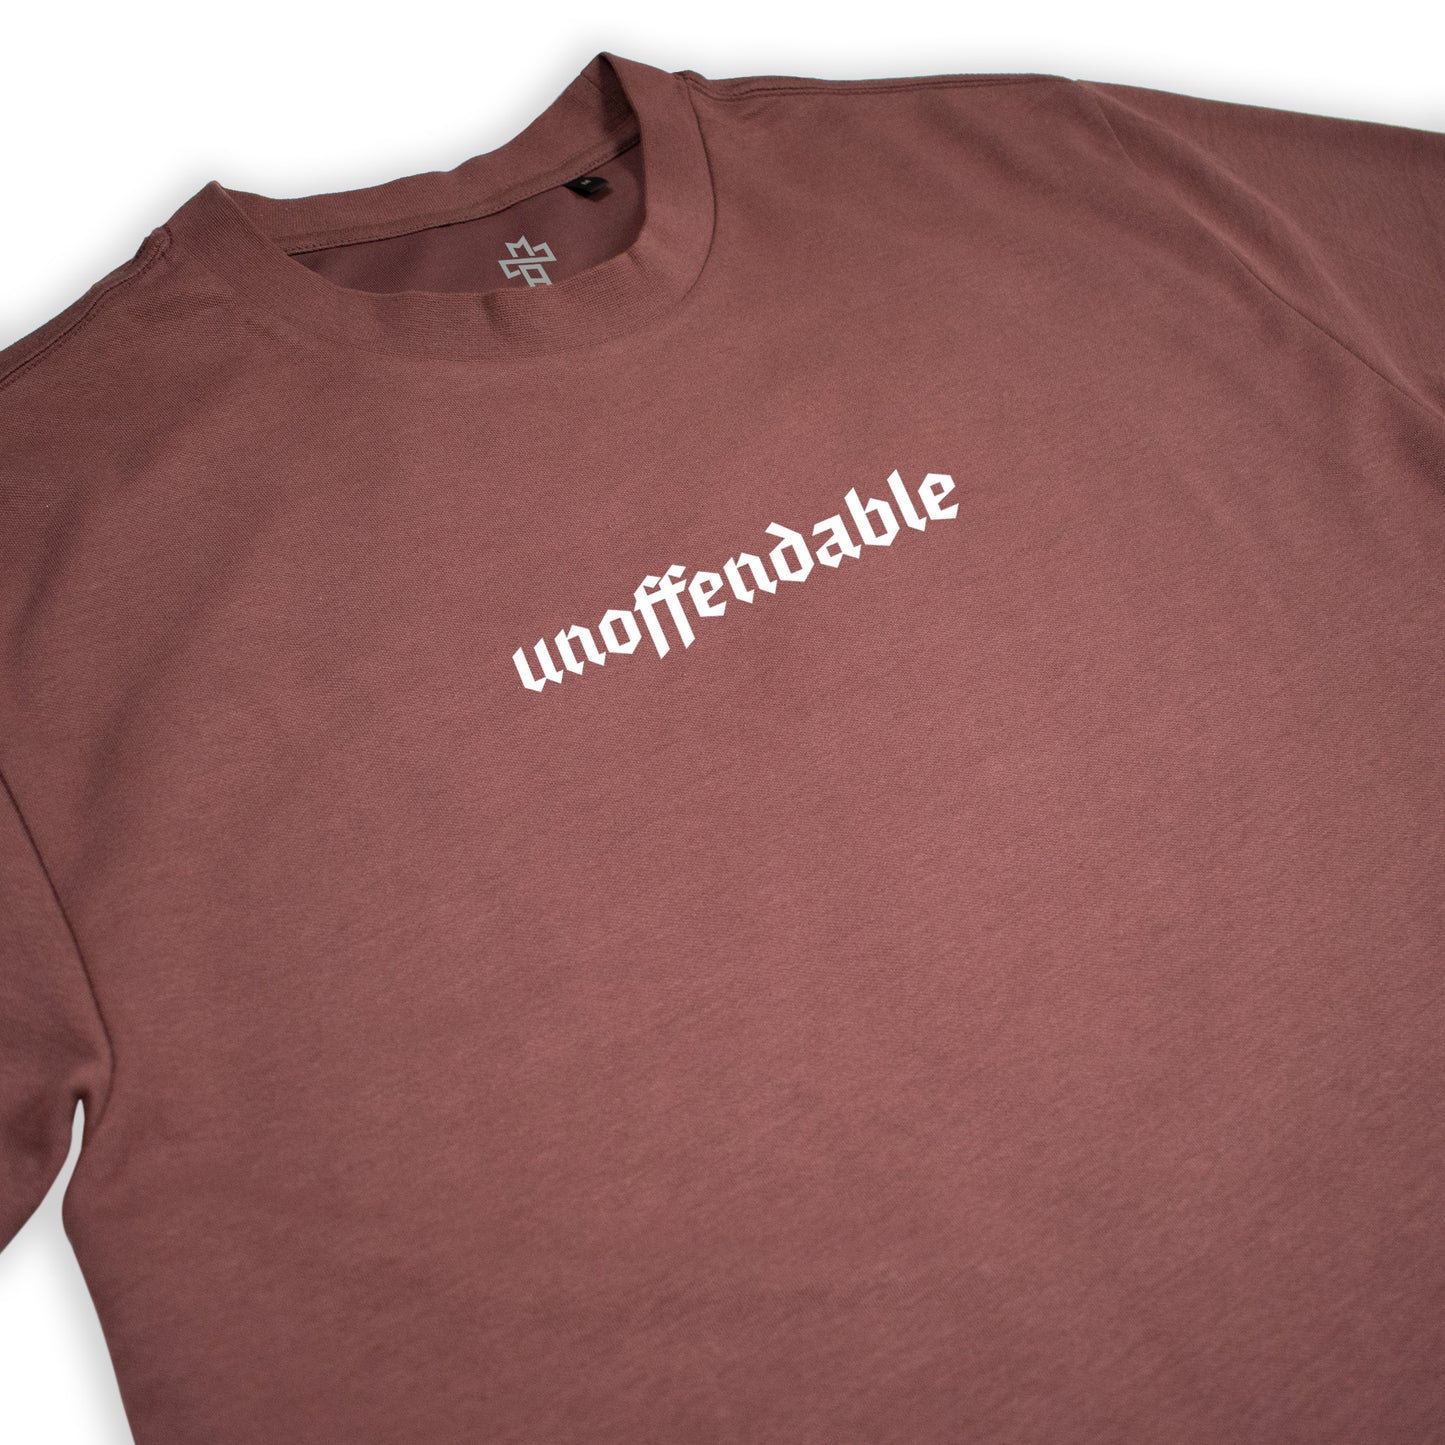 Unoffendable - Tee